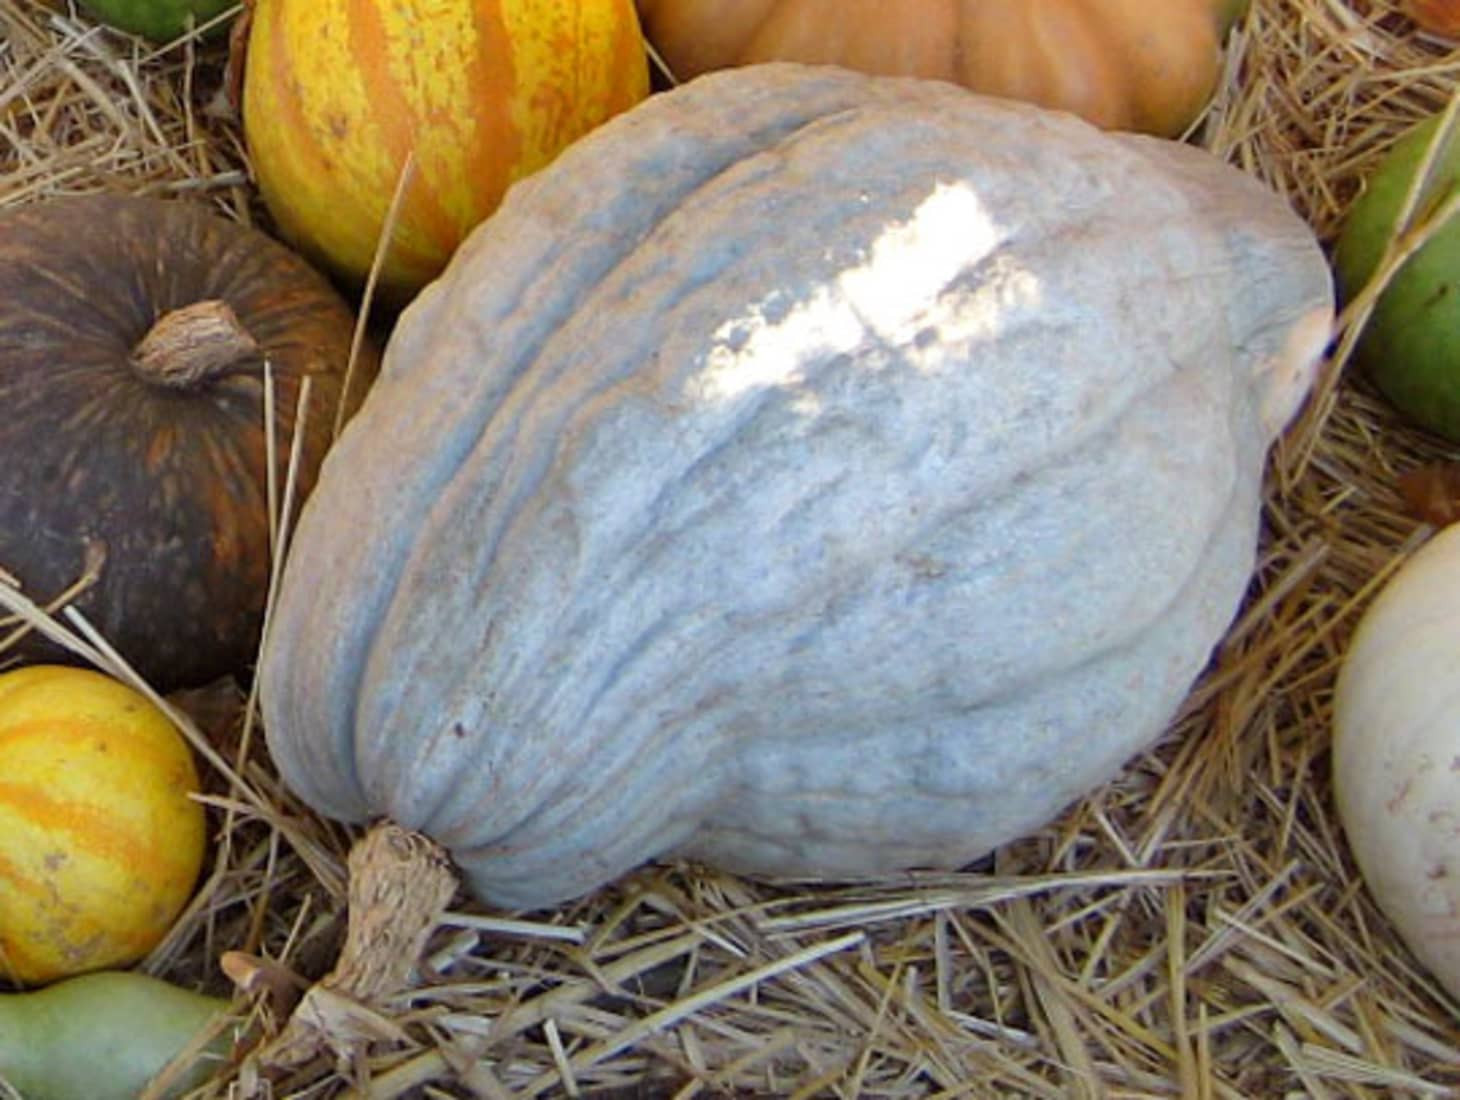 Winter Squash Types
 The 11 Varieties of Winter Squash You Need to Know